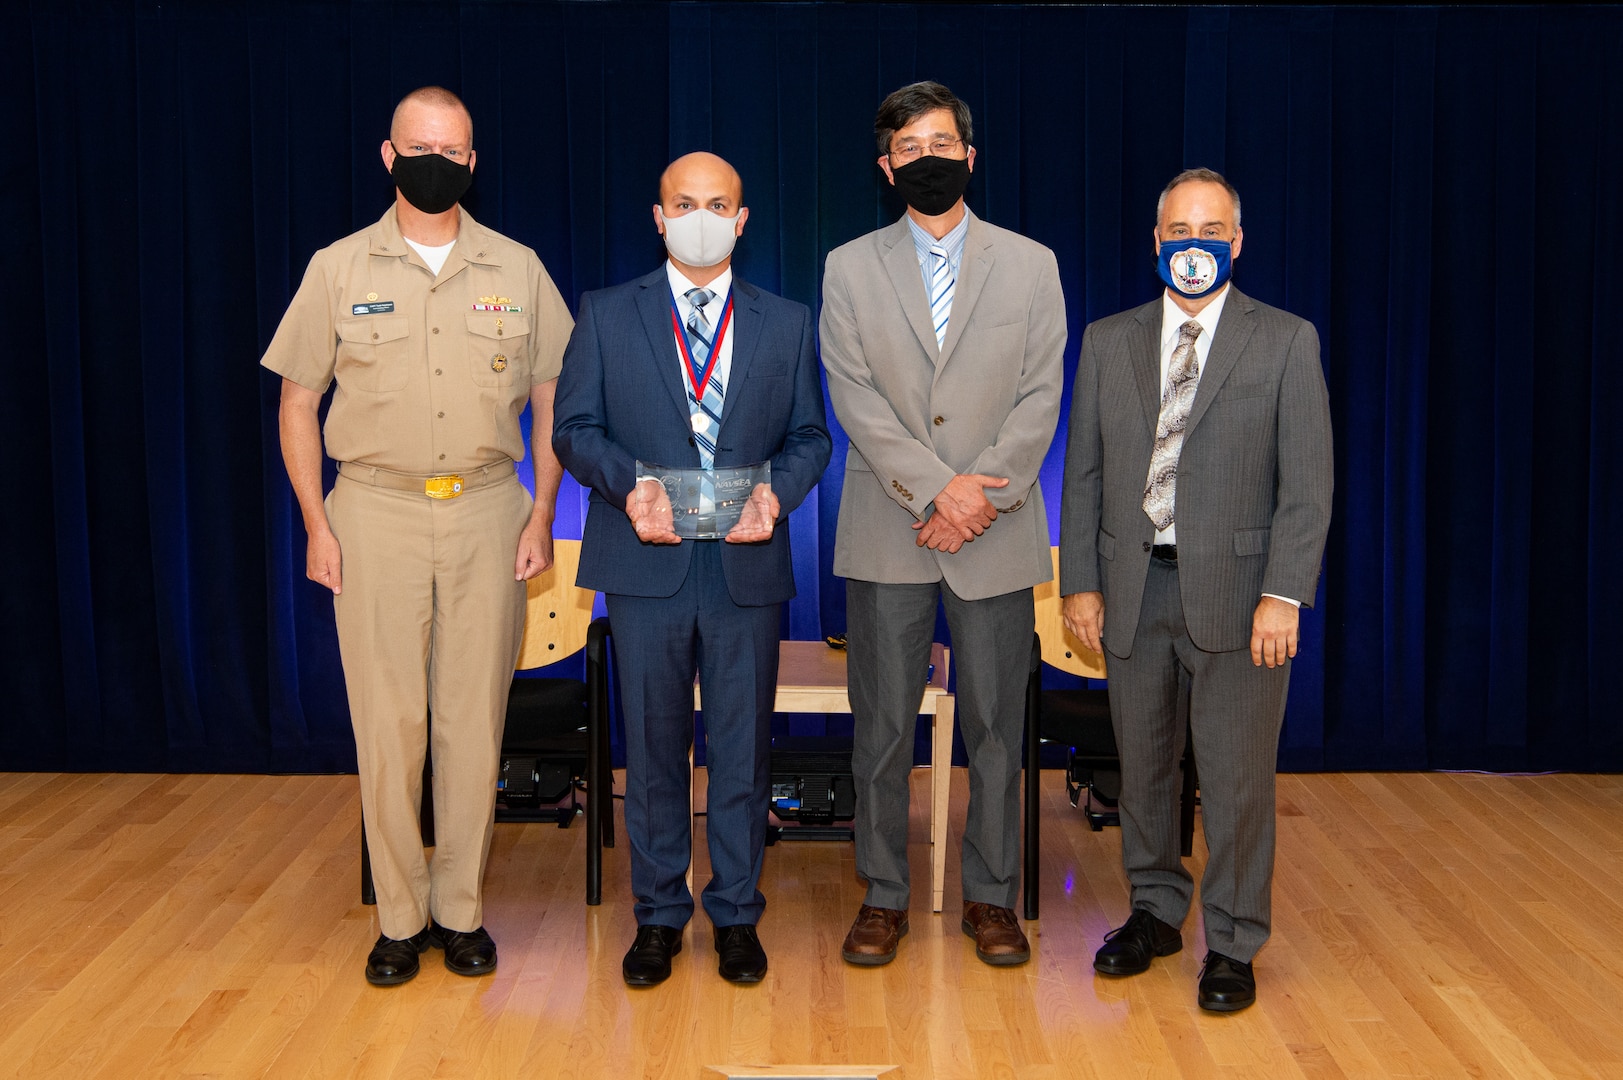 Naval Surface Warfare Center, Carderock Division Commanding Officer Capt. Todd E. Hutchison, Signatures Department Head Paul Shang and Technical Director Larry Tarasek present the Rear Adm. David W. Taylor Award for Outstanding Scientific Achievement to Dr. Alexey Titovich